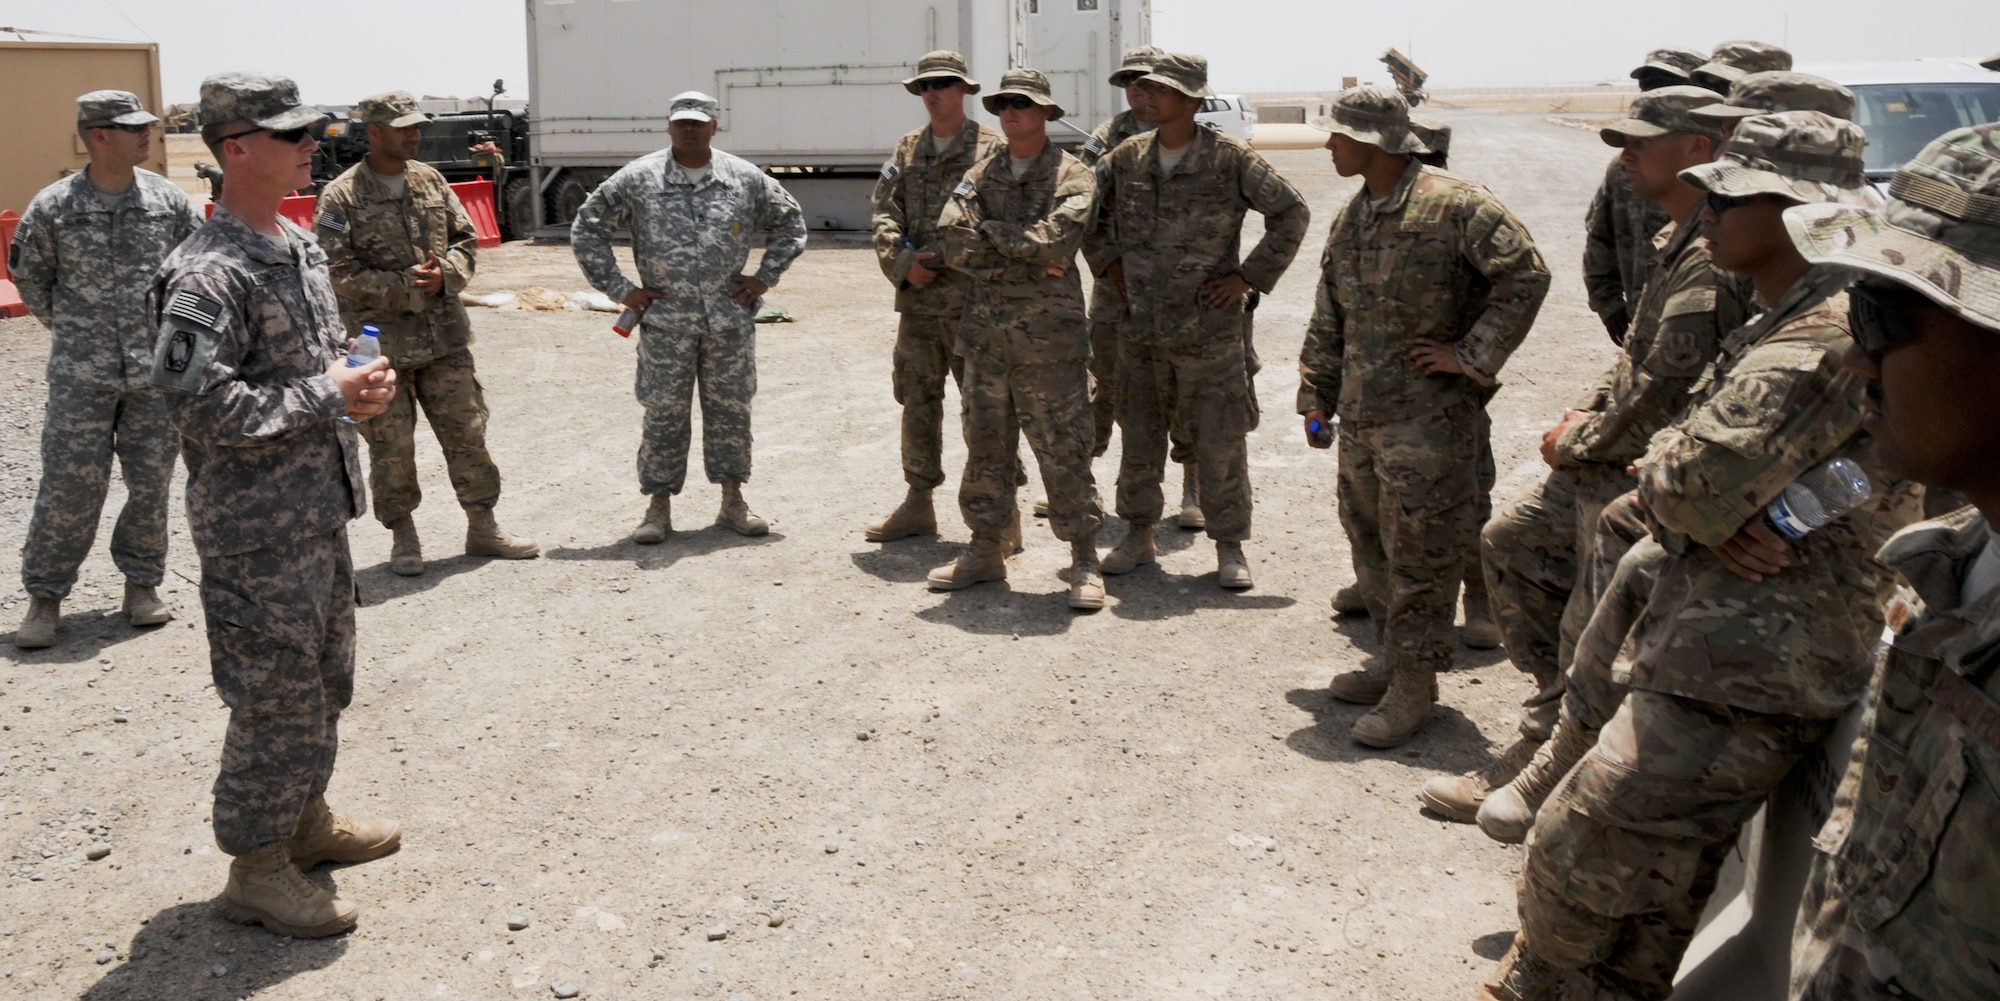 U.S. Army 1st Lt. Ryan Thompson, 1-62 Air Defense Artillery Battalion tactical control officer, briefs members of the 380th Air Expeditionary Wing during a tour of a Patriot missile site at an undisclosed location in Southwest Asia June 14, 2013. The 1-62 ADA BN mission is to intercept tactical ballistic missiles in defense of the base, which is integrated into operations with the Air Force. The tour of the 1-62 ADA BN’s Patriot site was part of the Army’s 238th Birthday celebration. (U.S. Air Force photo by Senior Airman Jacob Morgan)